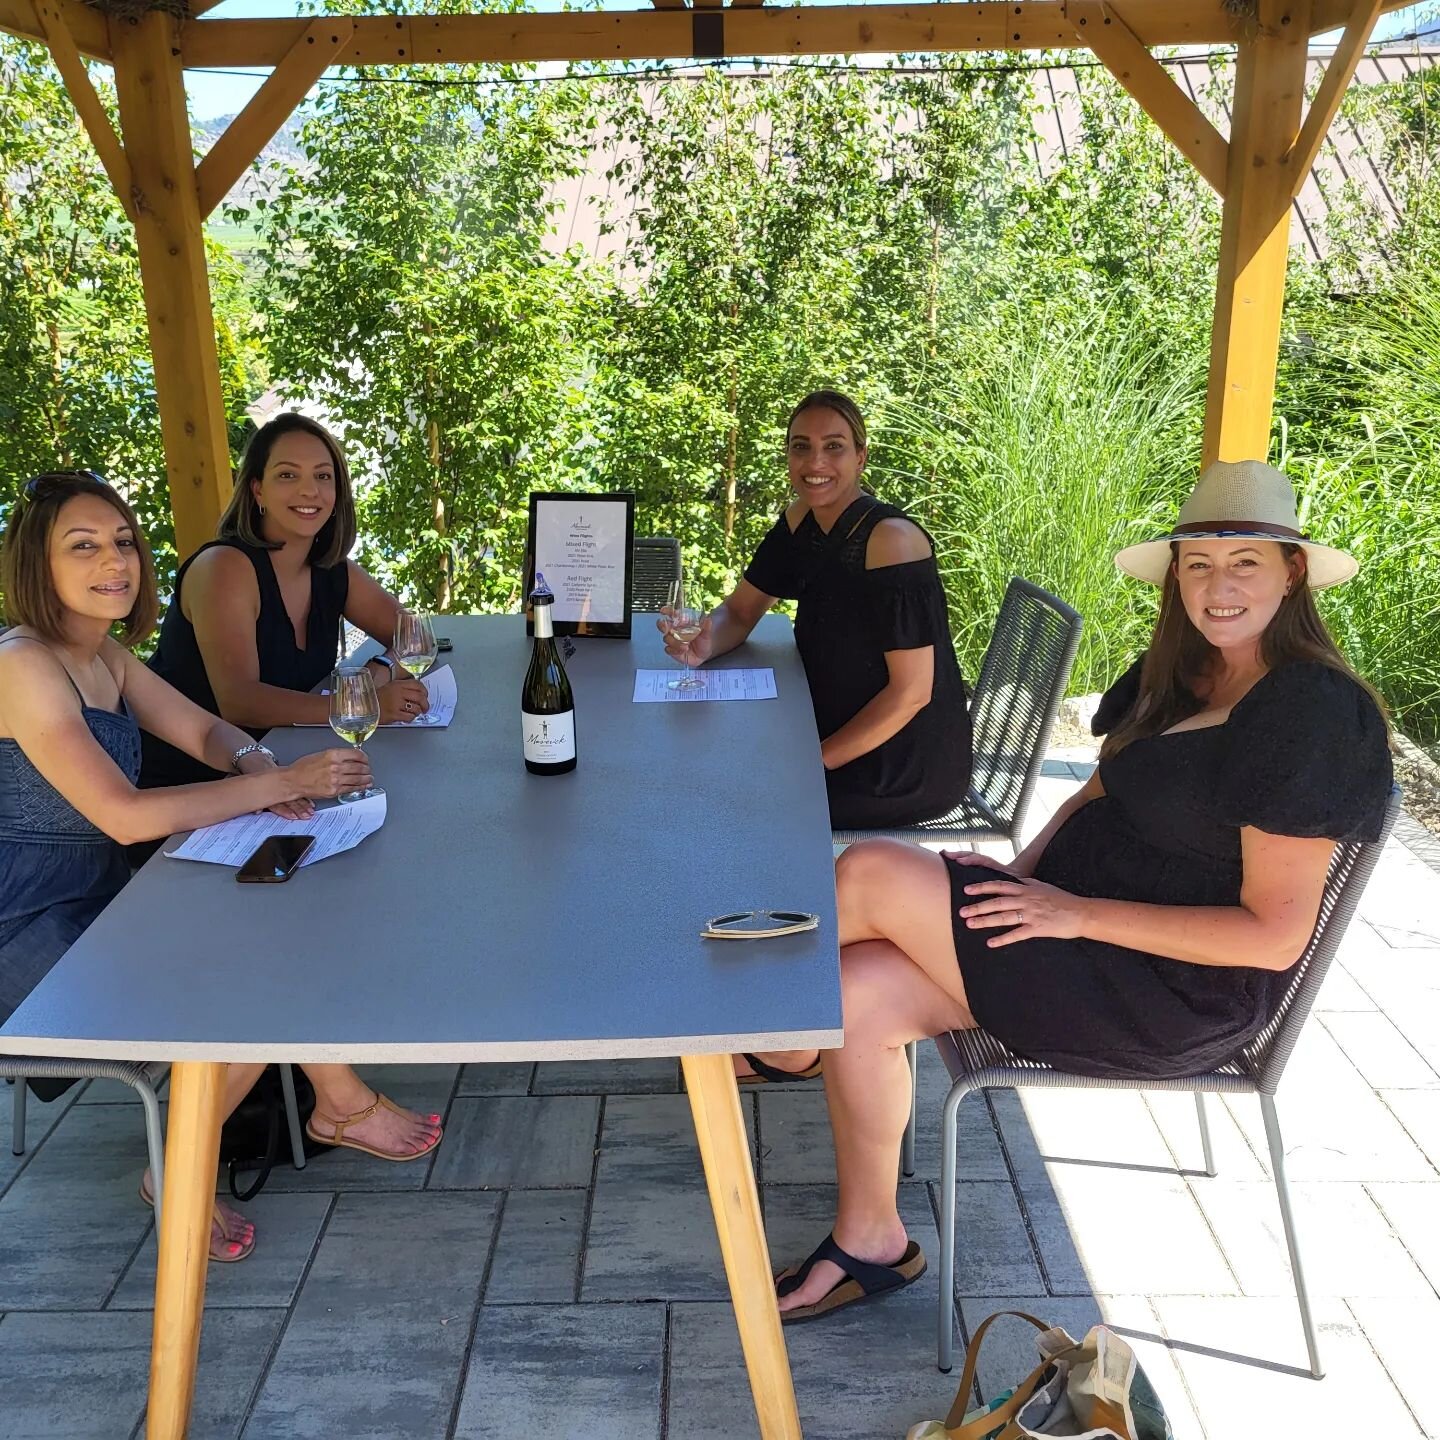 Great patio session with these lovely ladies. So greatful I could be a part of their day. Feeling quite blessed in wine country. Thanks for the wonderful tasting @maverick.winery 
#patiosession #patiovibes #hotsummerday #sistersandwine #winetour #uni